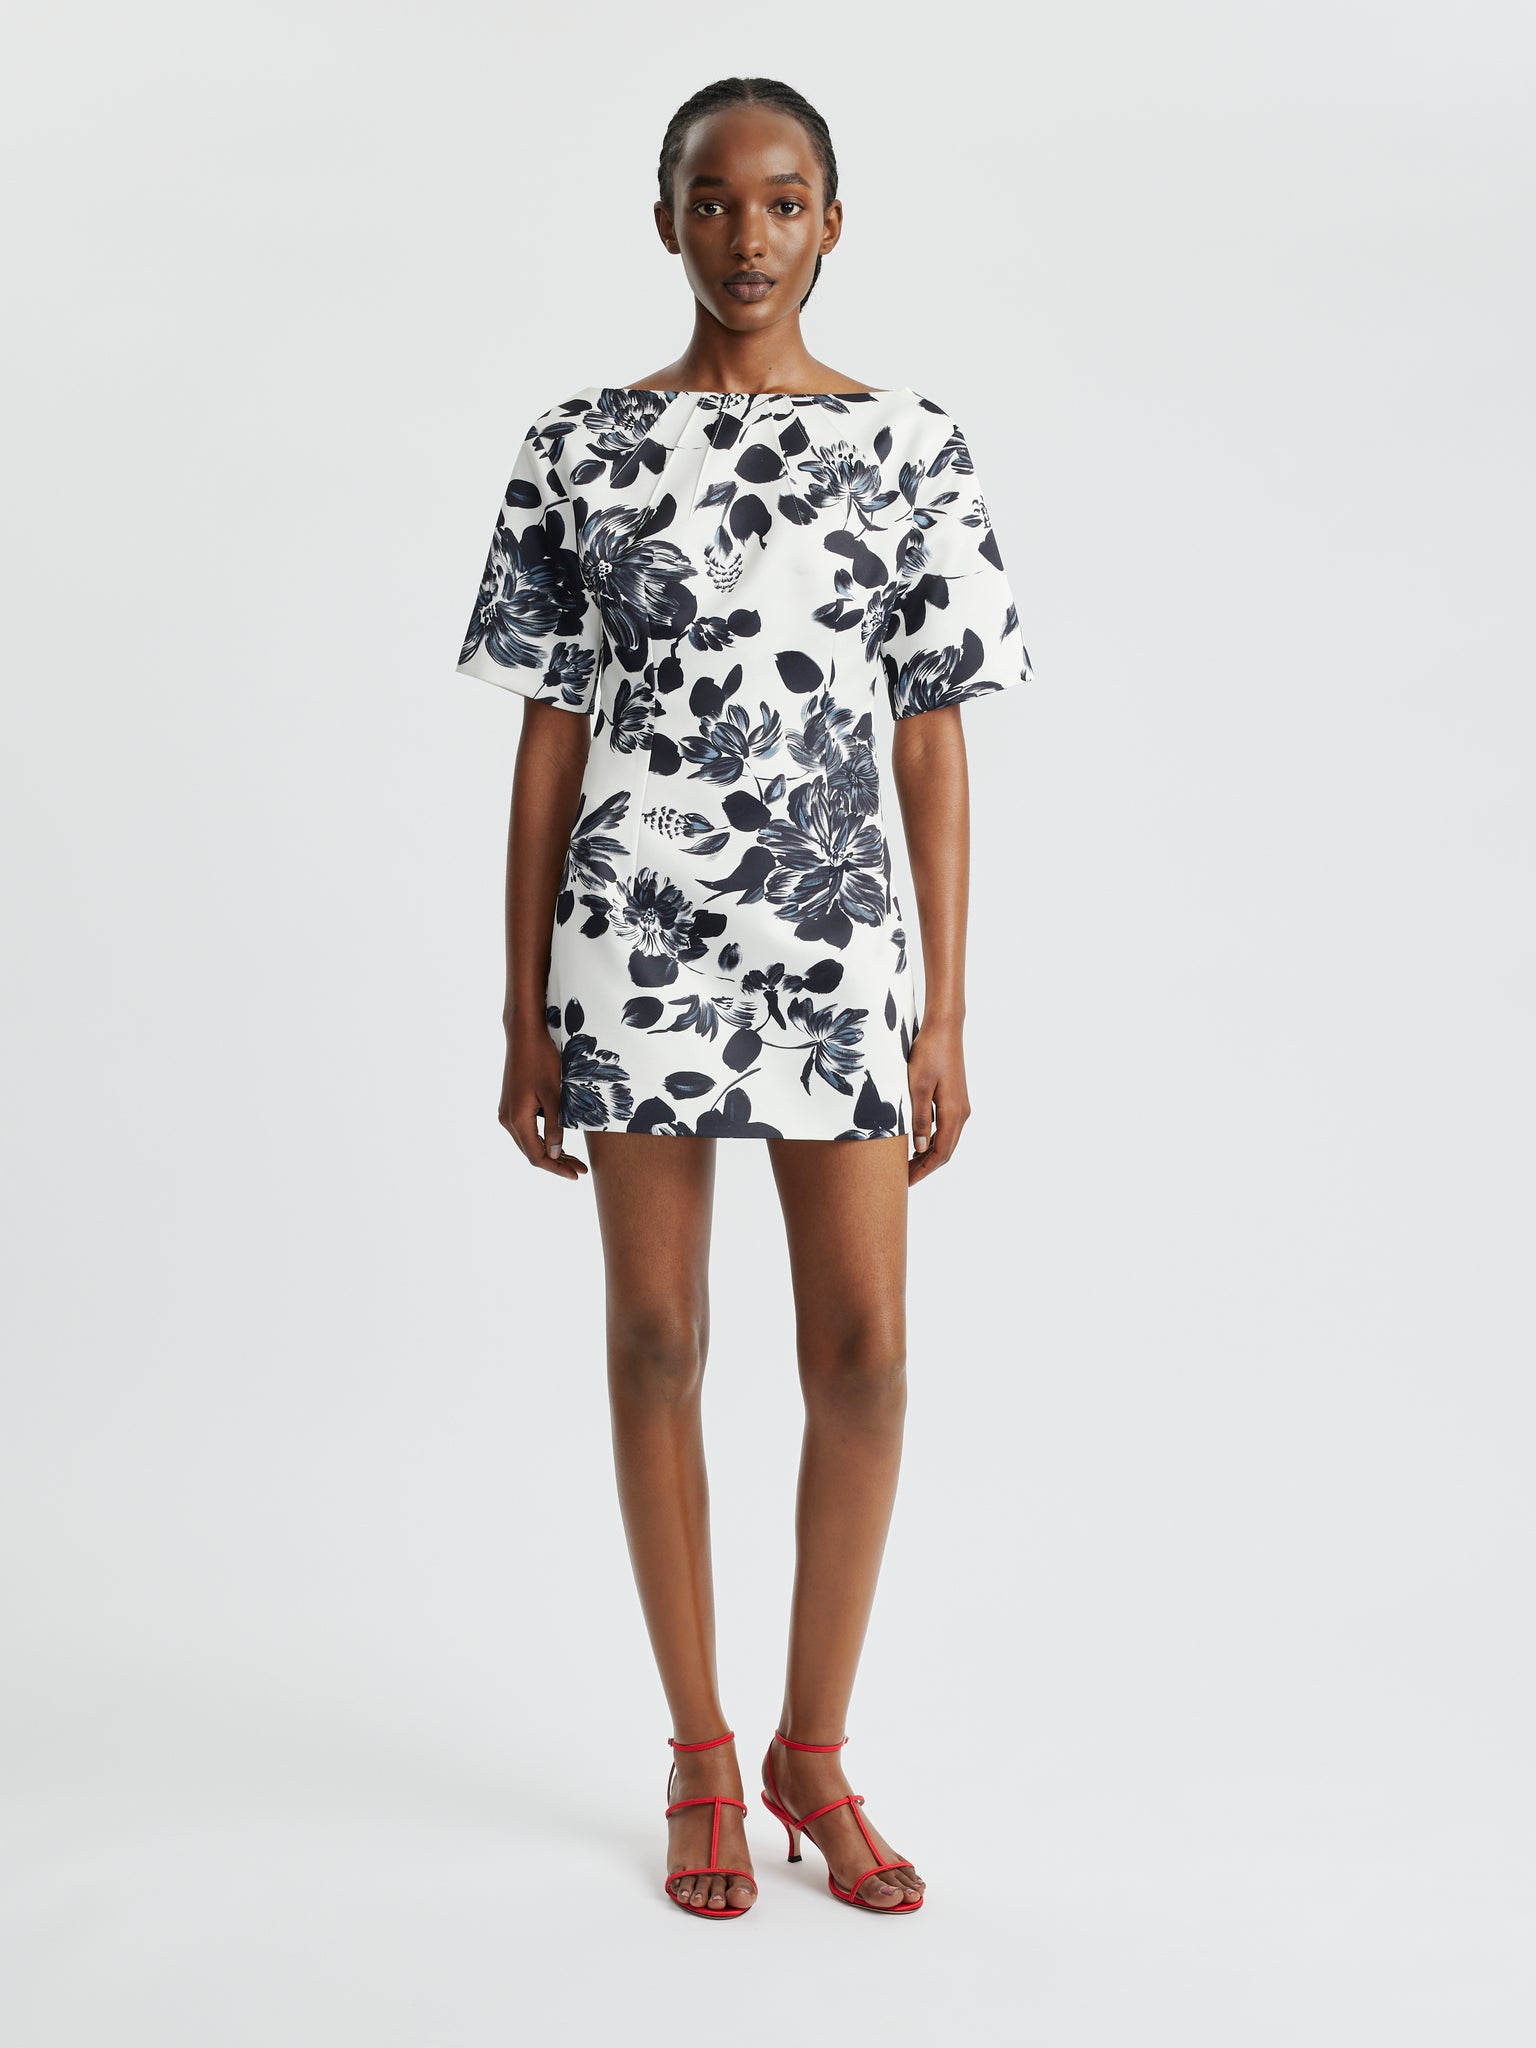 Guinevere Top In Black Floral On Ivory Printed Twill